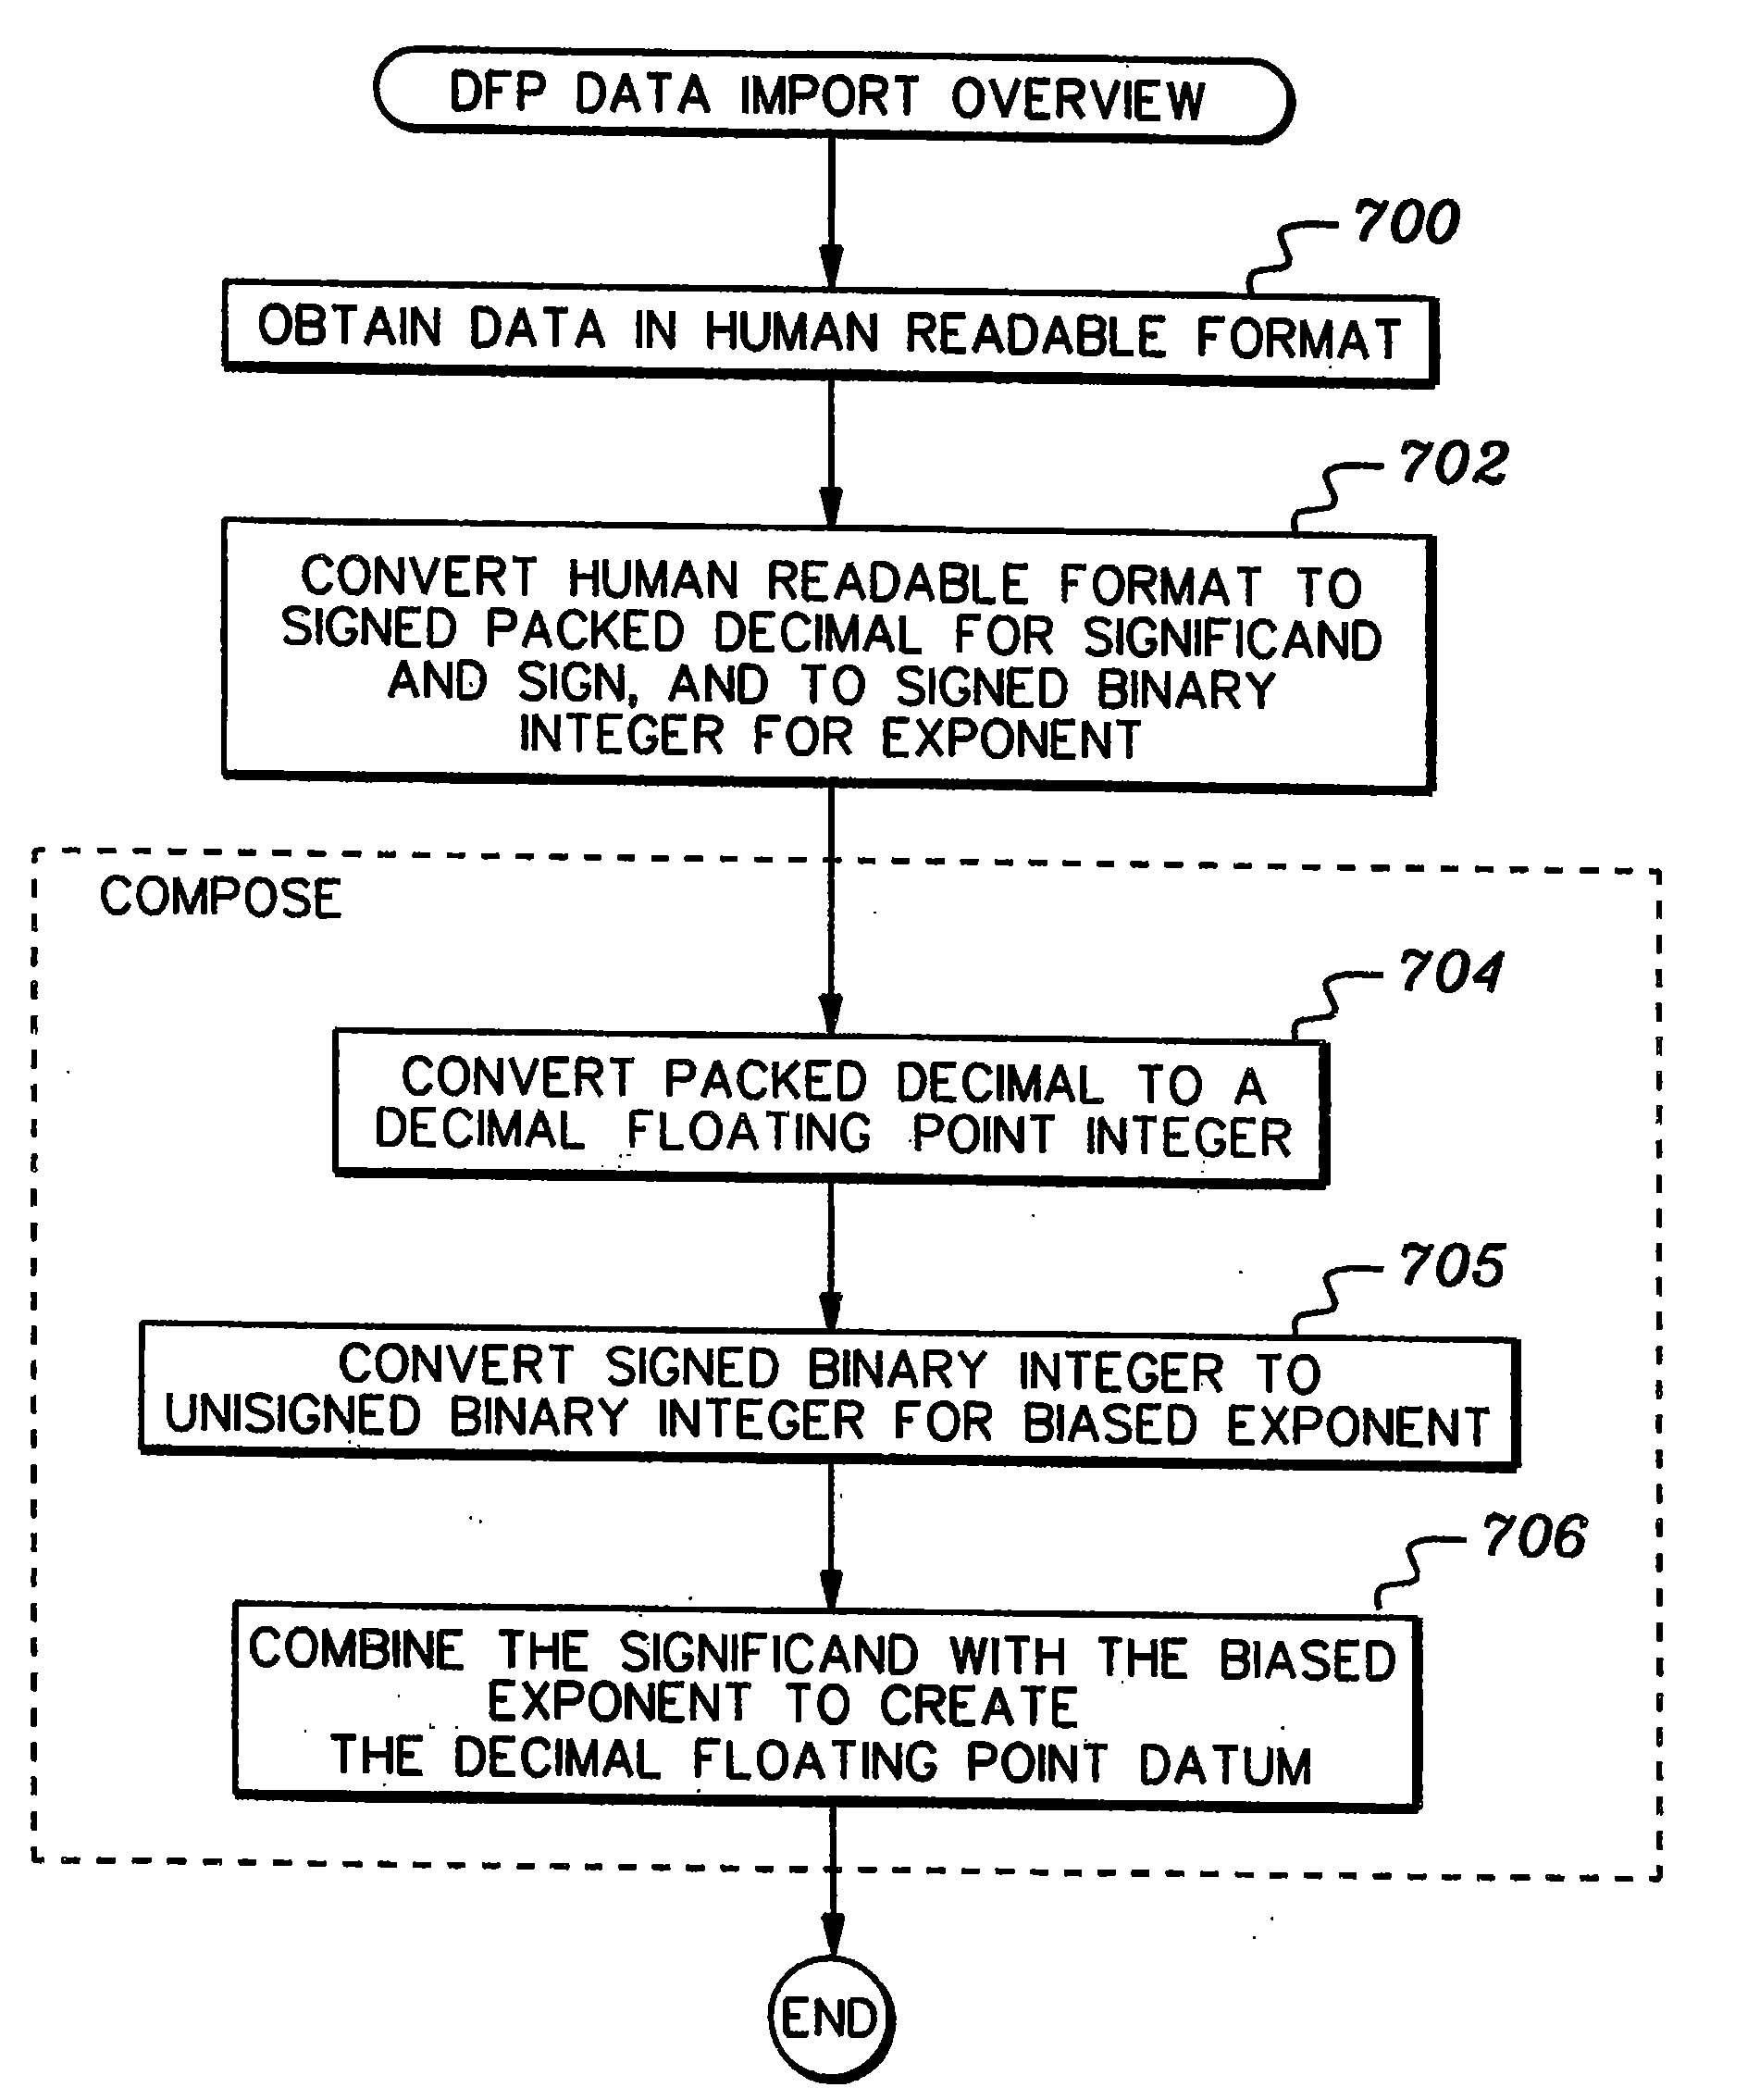 Composition/decomposition of decimal floating point data